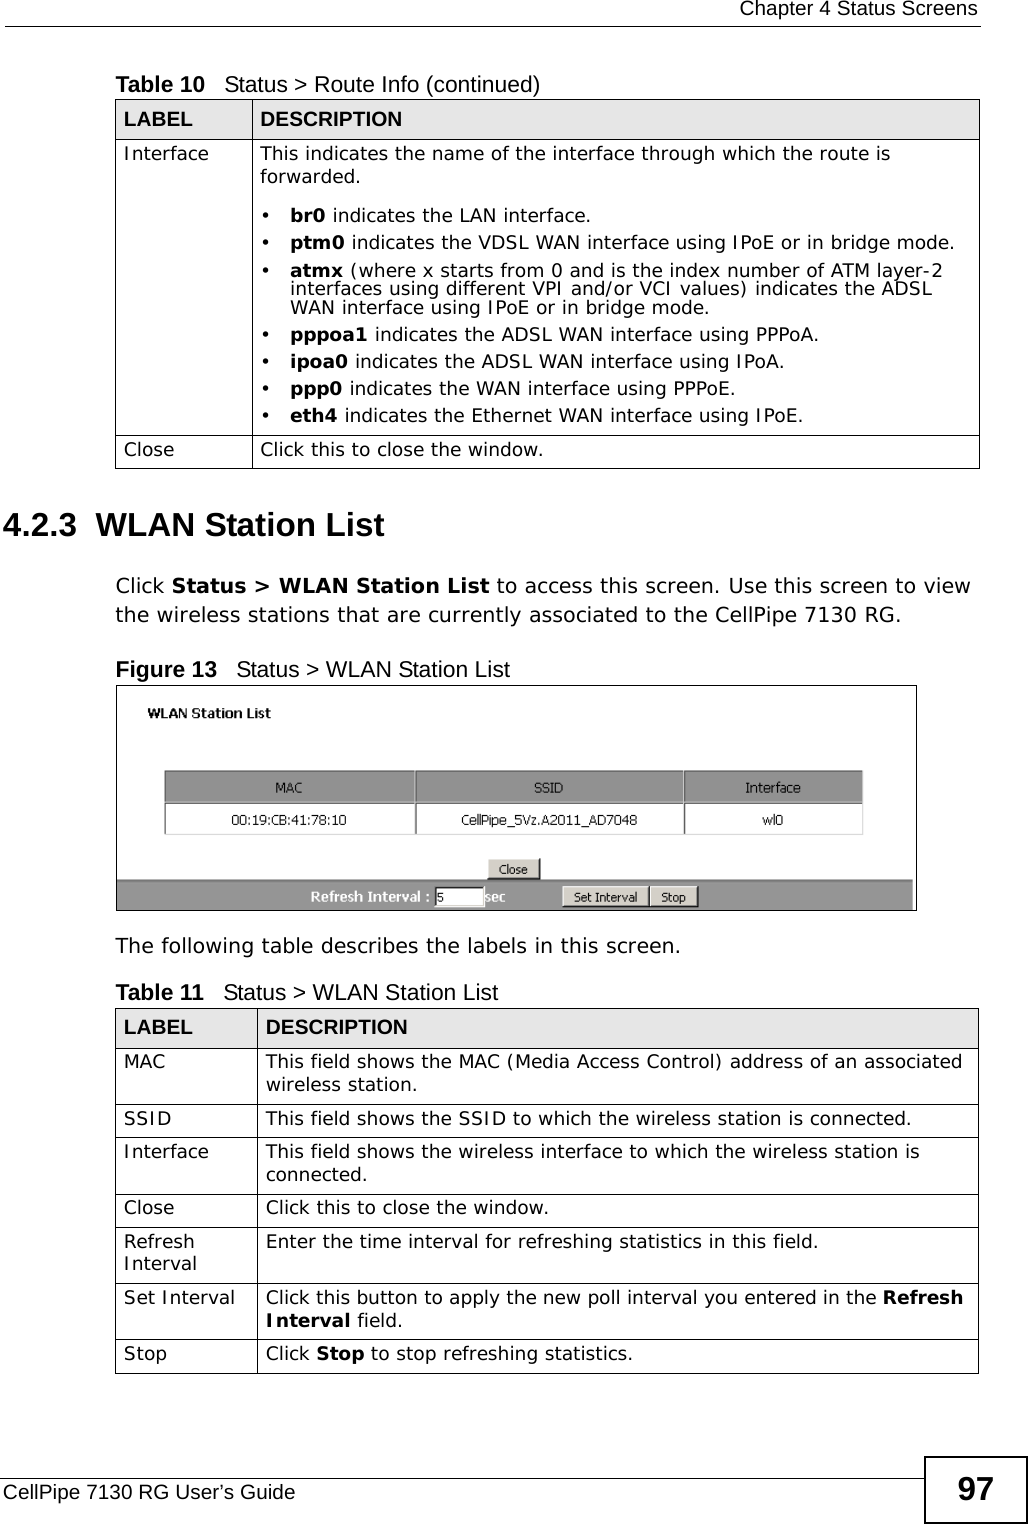  Chapter 4 Status ScreensCellPipe 7130 RG User’s Guide 974.2.3  WLAN Station ListClick Status &gt; WLAN Station List to access this screen. Use this screen to view the wireless stations that are currently associated to the CellPipe 7130 RG.Figure 13   Status &gt; WLAN Station ListThe following table describes the labels in this screen.Interface This indicates the name of the interface through which the route is forwarded.•br0 indicates the LAN interface.•ptm0 indicates the VDSL WAN interface using IPoE or in bridge mode.•atmx (where x starts from 0 and is the index number of ATM layer-2 interfaces using different VPI and/or VCI values) indicates the ADSL WAN interface using IPoE or in bridge mode.•pppoa1 indicates the ADSL WAN interface using PPPoA.•ipoa0 indicates the ADSL WAN interface using IPoA.•ppp0 indicates the WAN interface using PPPoE.•eth4 indicates the Ethernet WAN interface using IPoE.Close Click this to close the window.Table 10   Status &gt; Route Info (continued)LABEL DESCRIPTIONTable 11   Status &gt; WLAN Station ListLABEL  DESCRIPTIONMAC  This field shows the MAC (Media Access Control) address of an associated wireless station.SSID This field shows the SSID to which the wireless station is connected.Interface This field shows the wireless interface to which the wireless station is connected.Close Click this to close the window.Refresh Interval Enter the time interval for refreshing statistics in this field.Set Interval Click this button to apply the new poll interval you entered in the Refresh Interval field.Stop Click Stop to stop refreshing statistics.